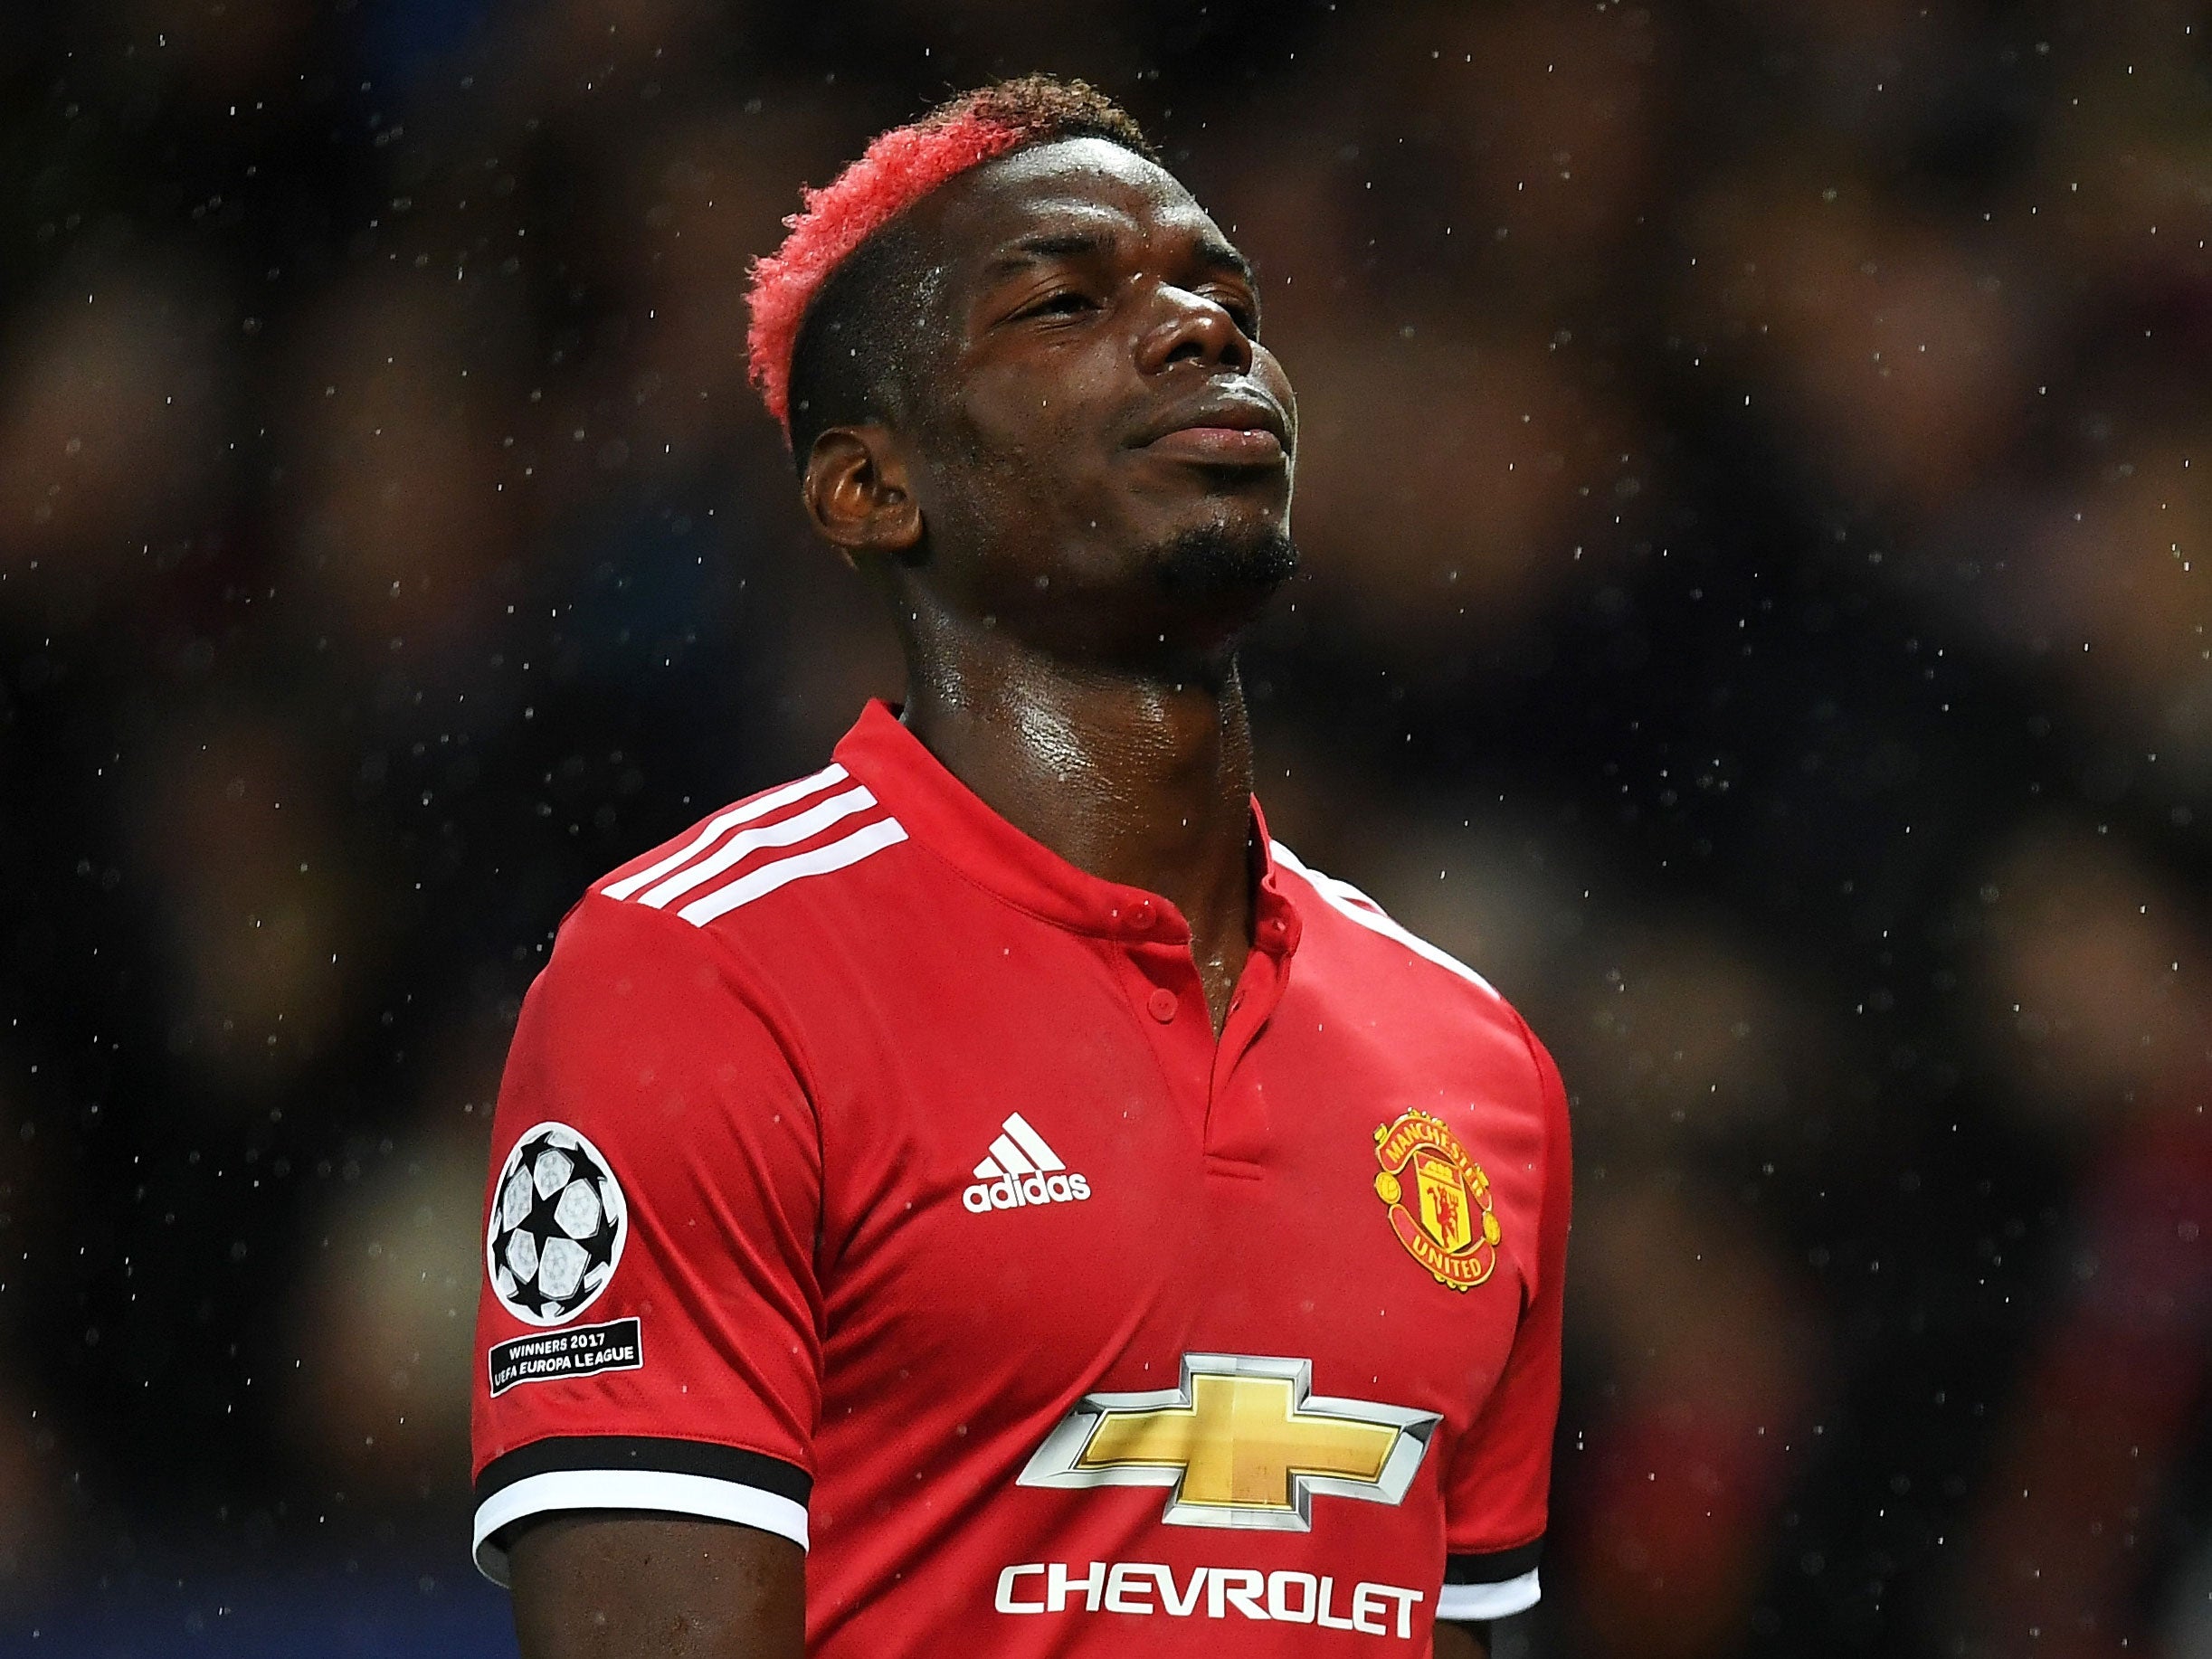 Paul Pogba has not featured since his hamstring injury in September